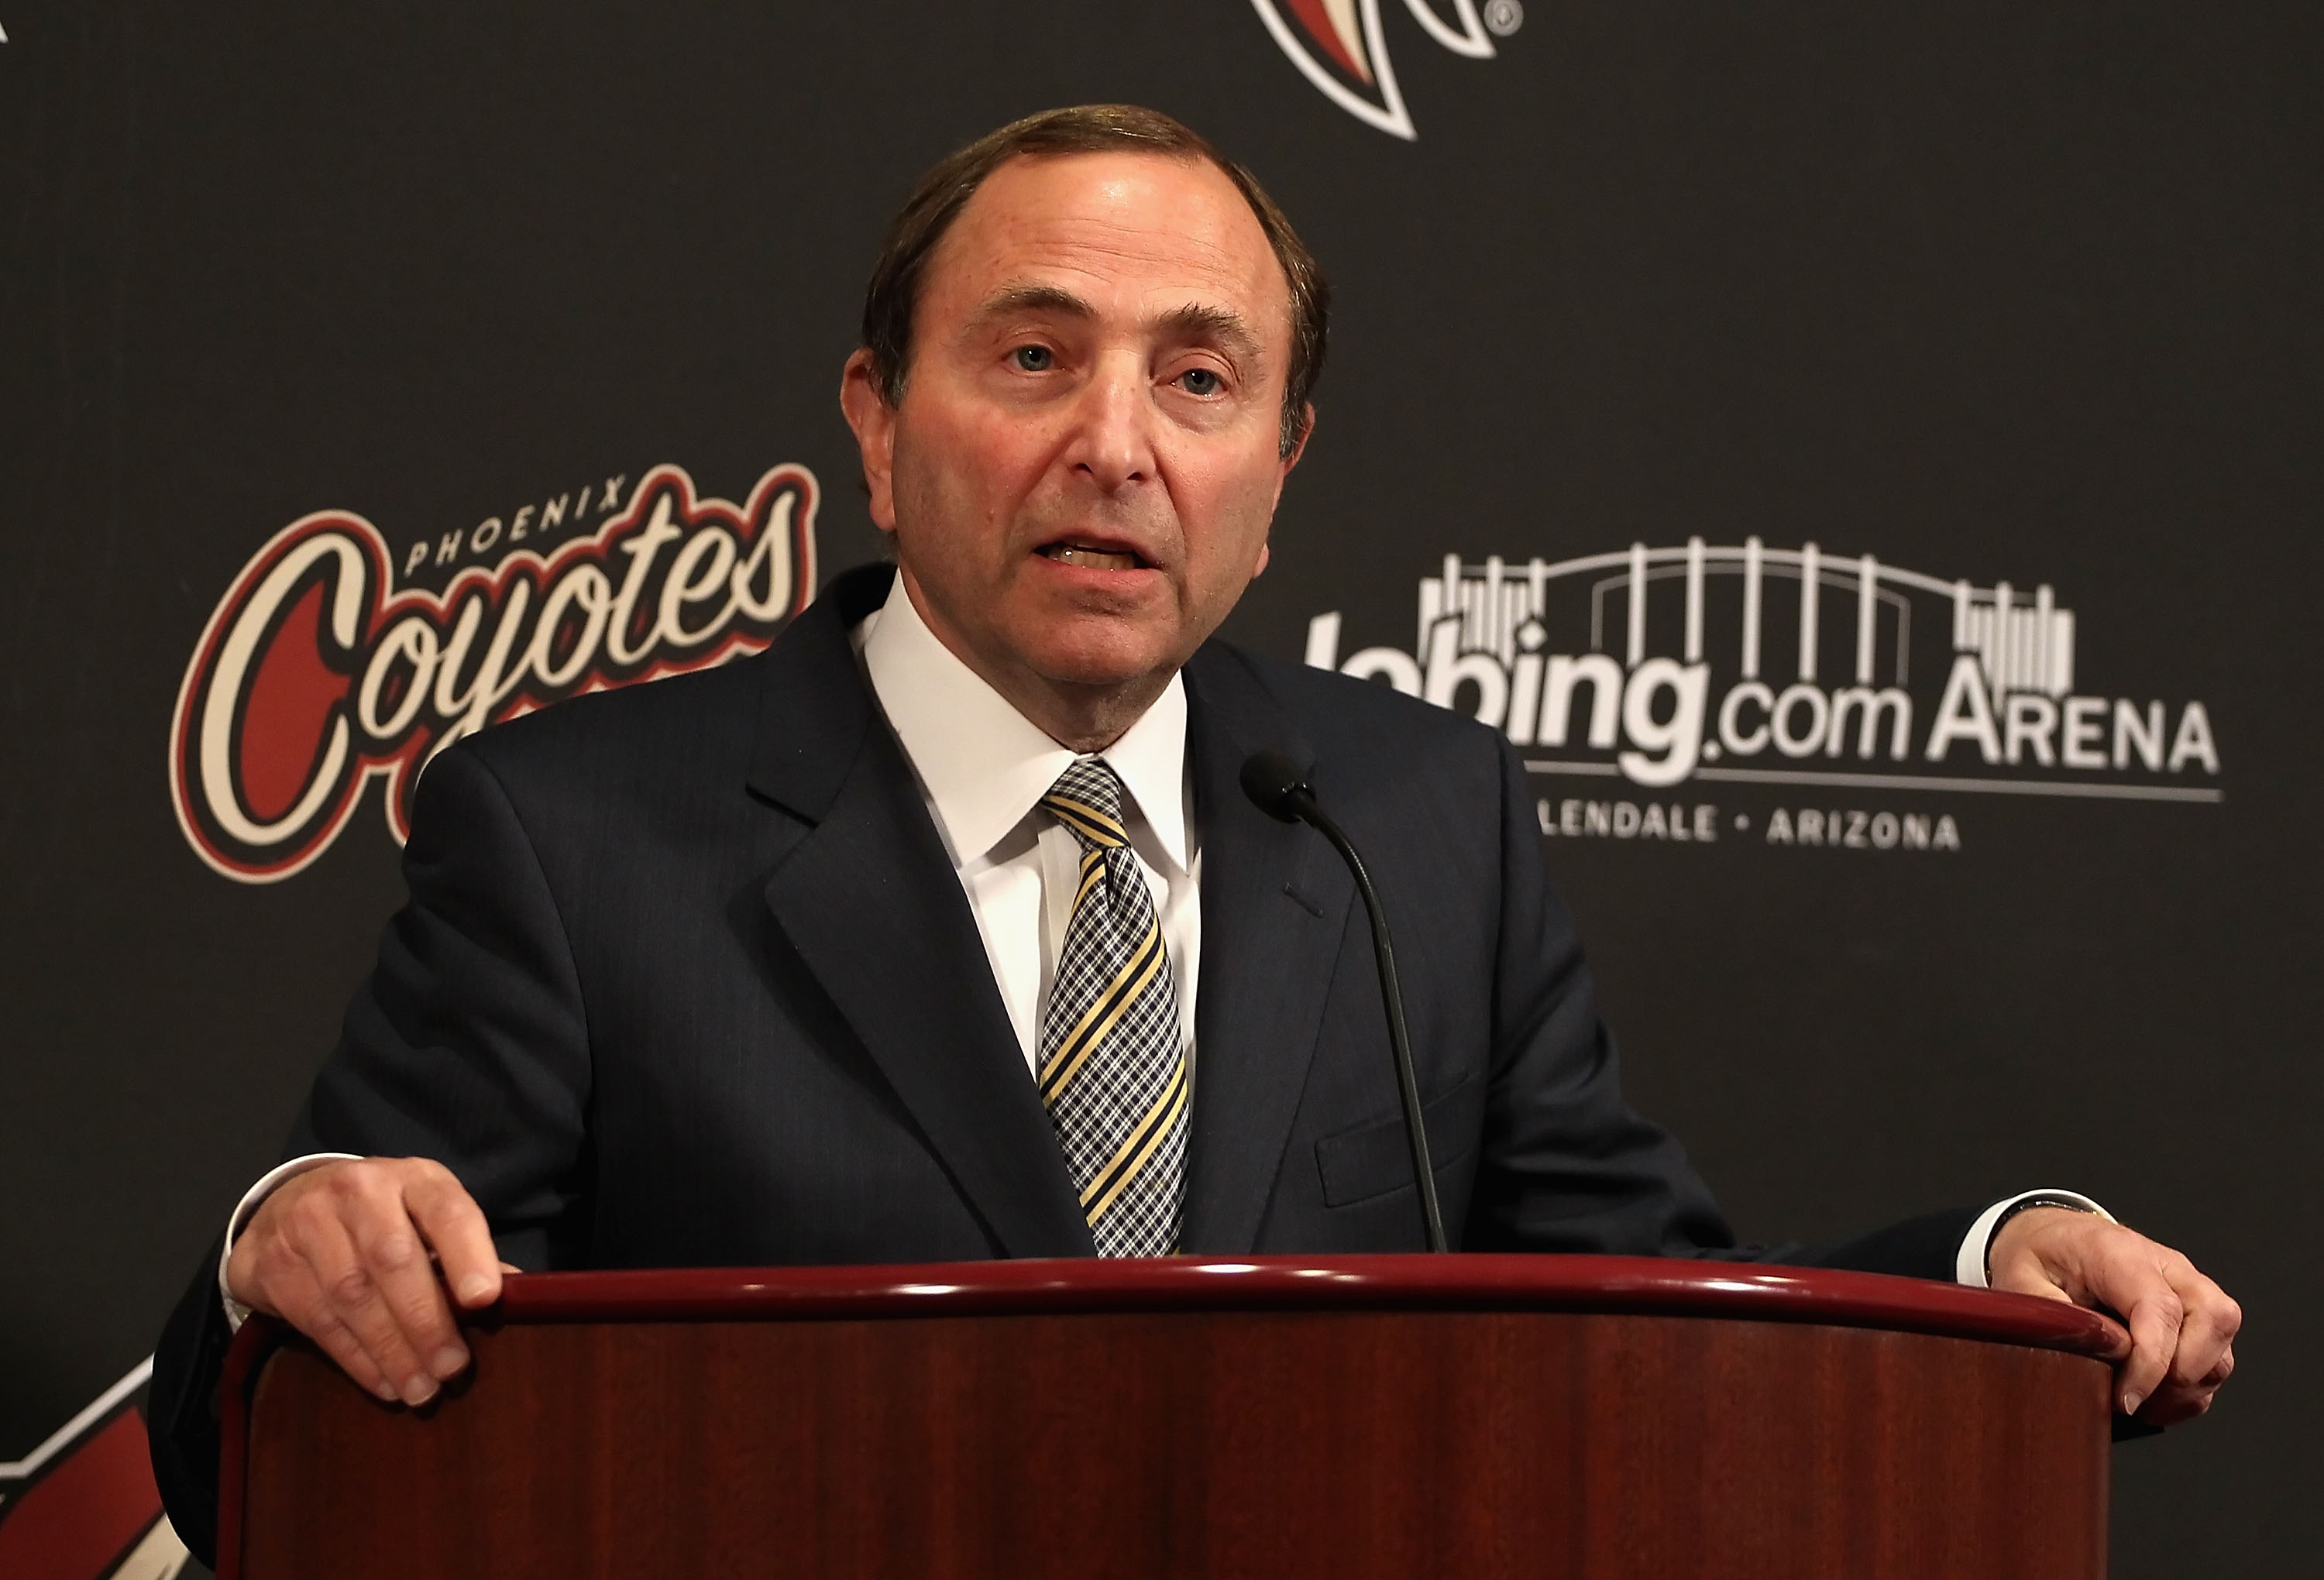 GLENDALE, AZ - MARCH 08:  NHL commissioner Gary Bettman speaks during a press conference before the NHL game between the Vancouver Canucks and the Phoenix Coyotes at Jobing.com Arena on March 8, 2011 in Glendale, Arizona.  (Photo by Christian Petersen/Get